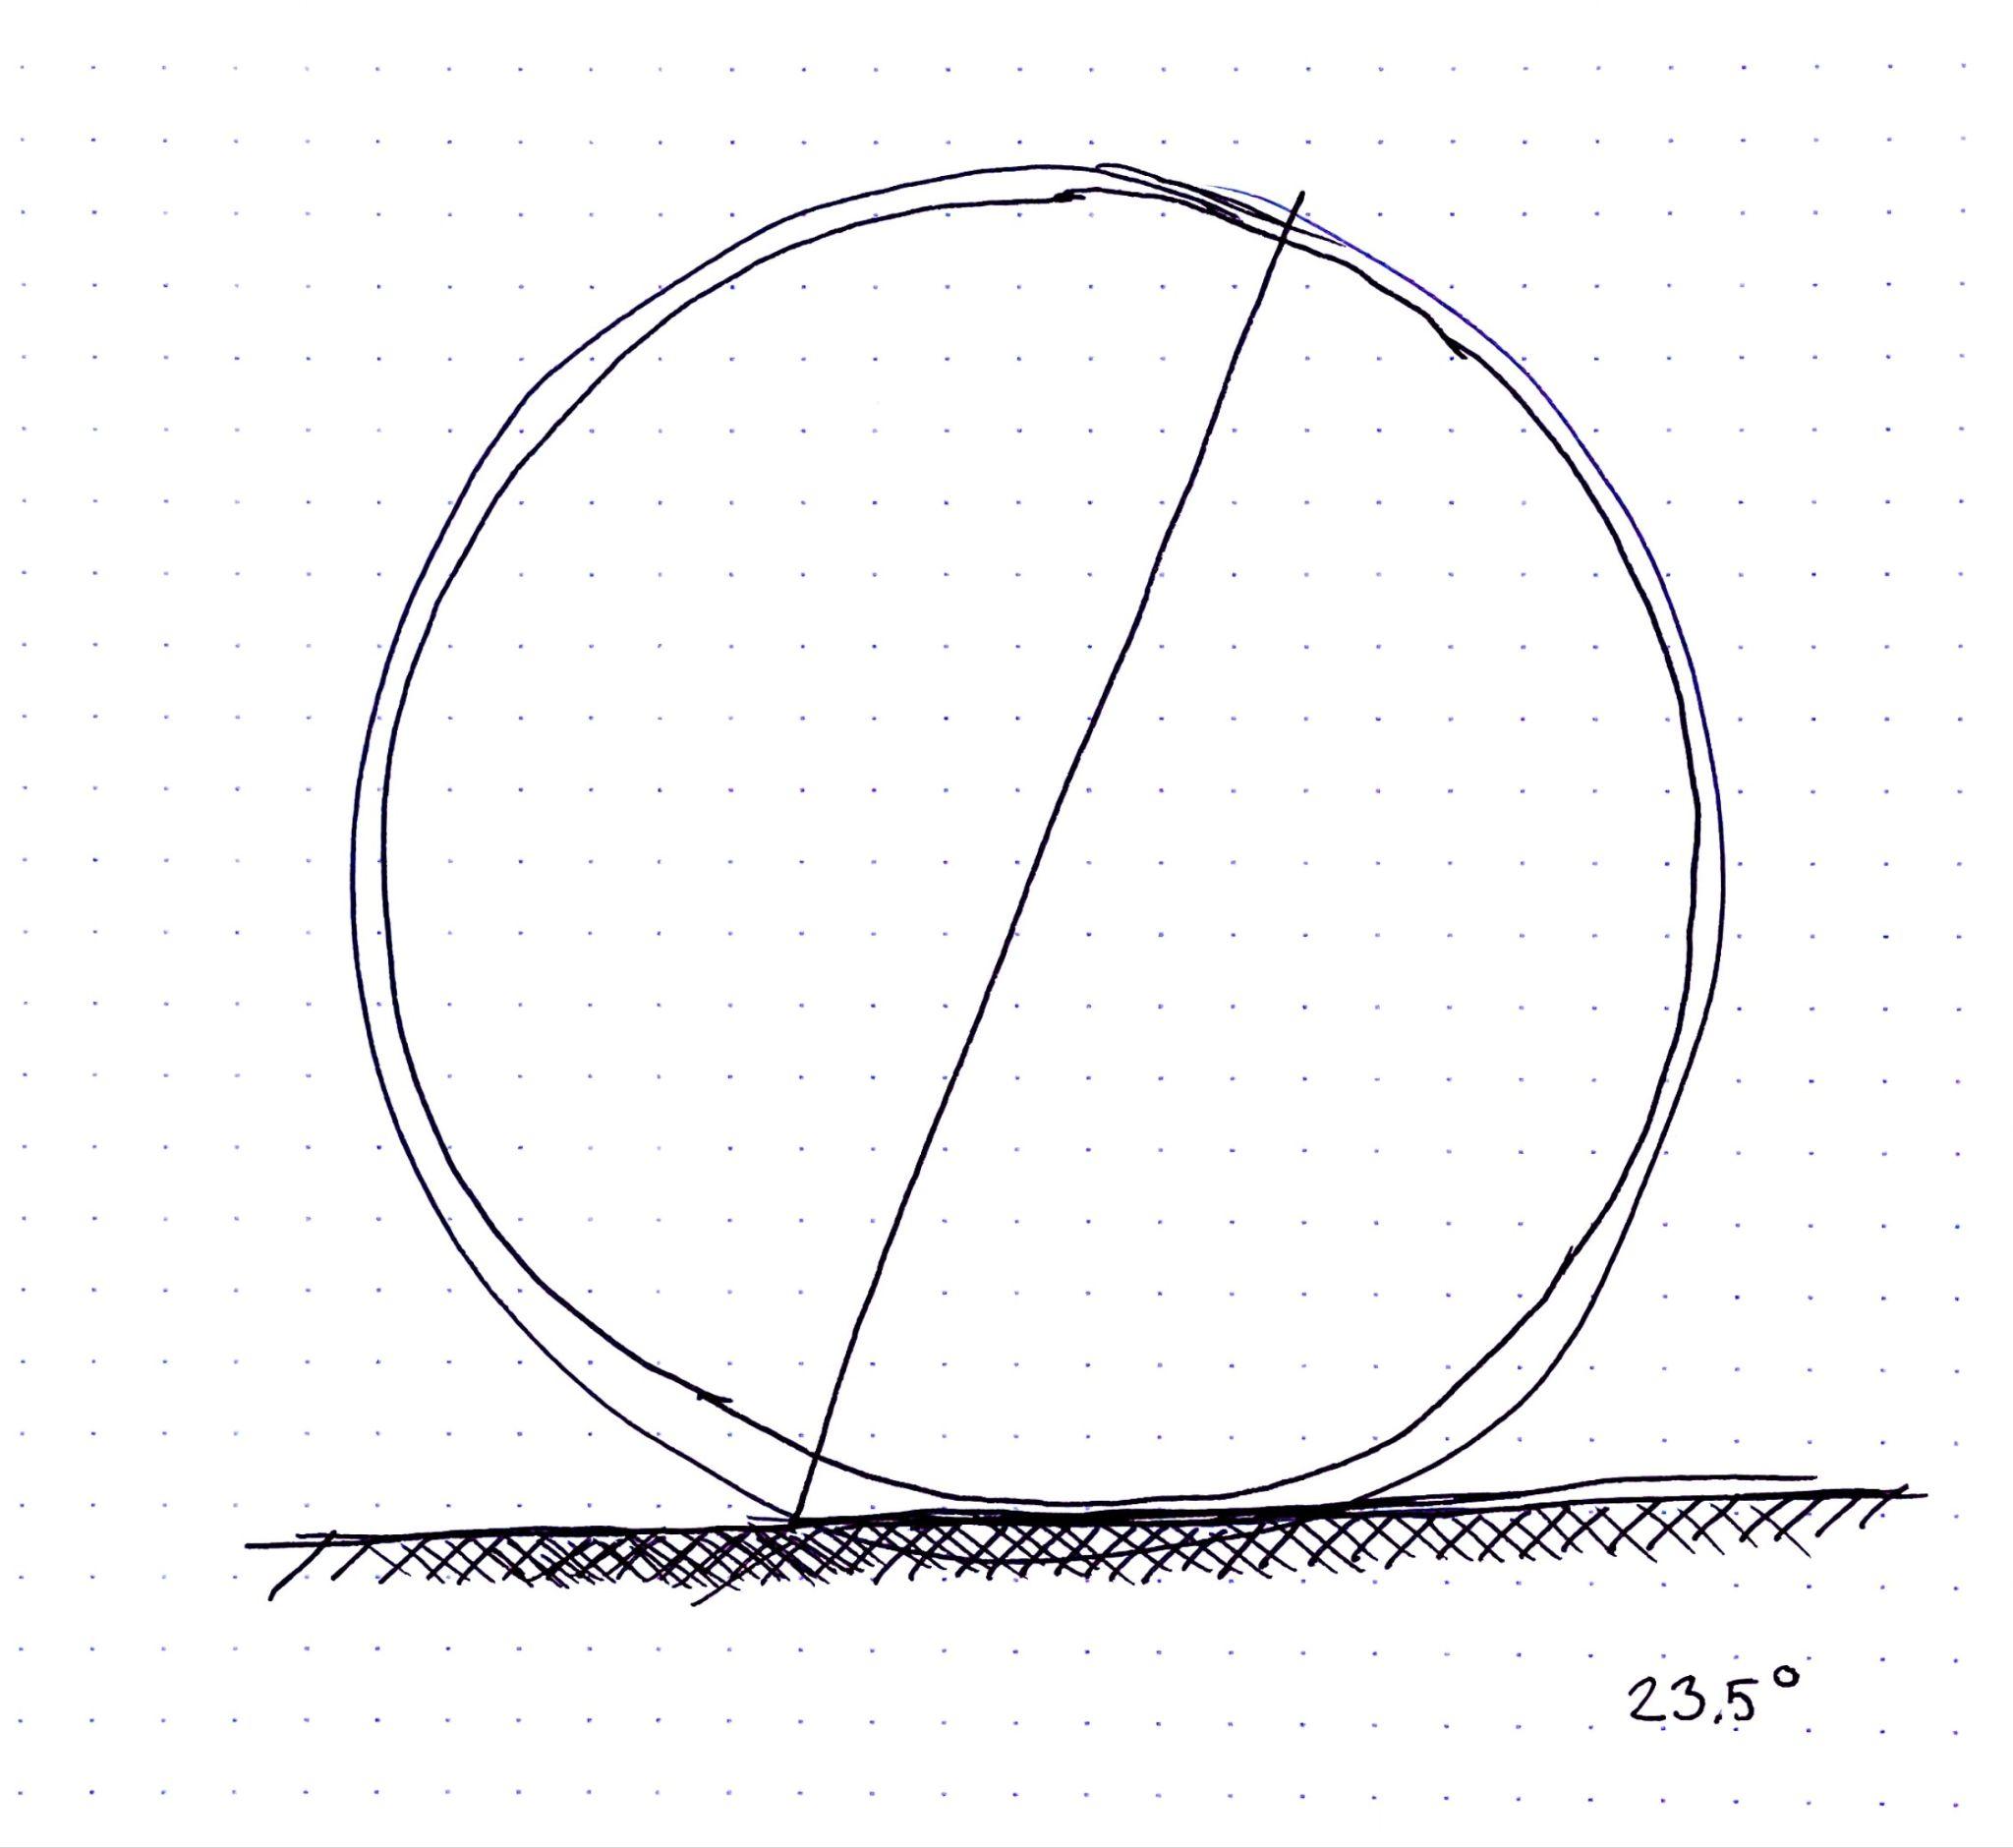 Figure 4: A sketch of the Orb